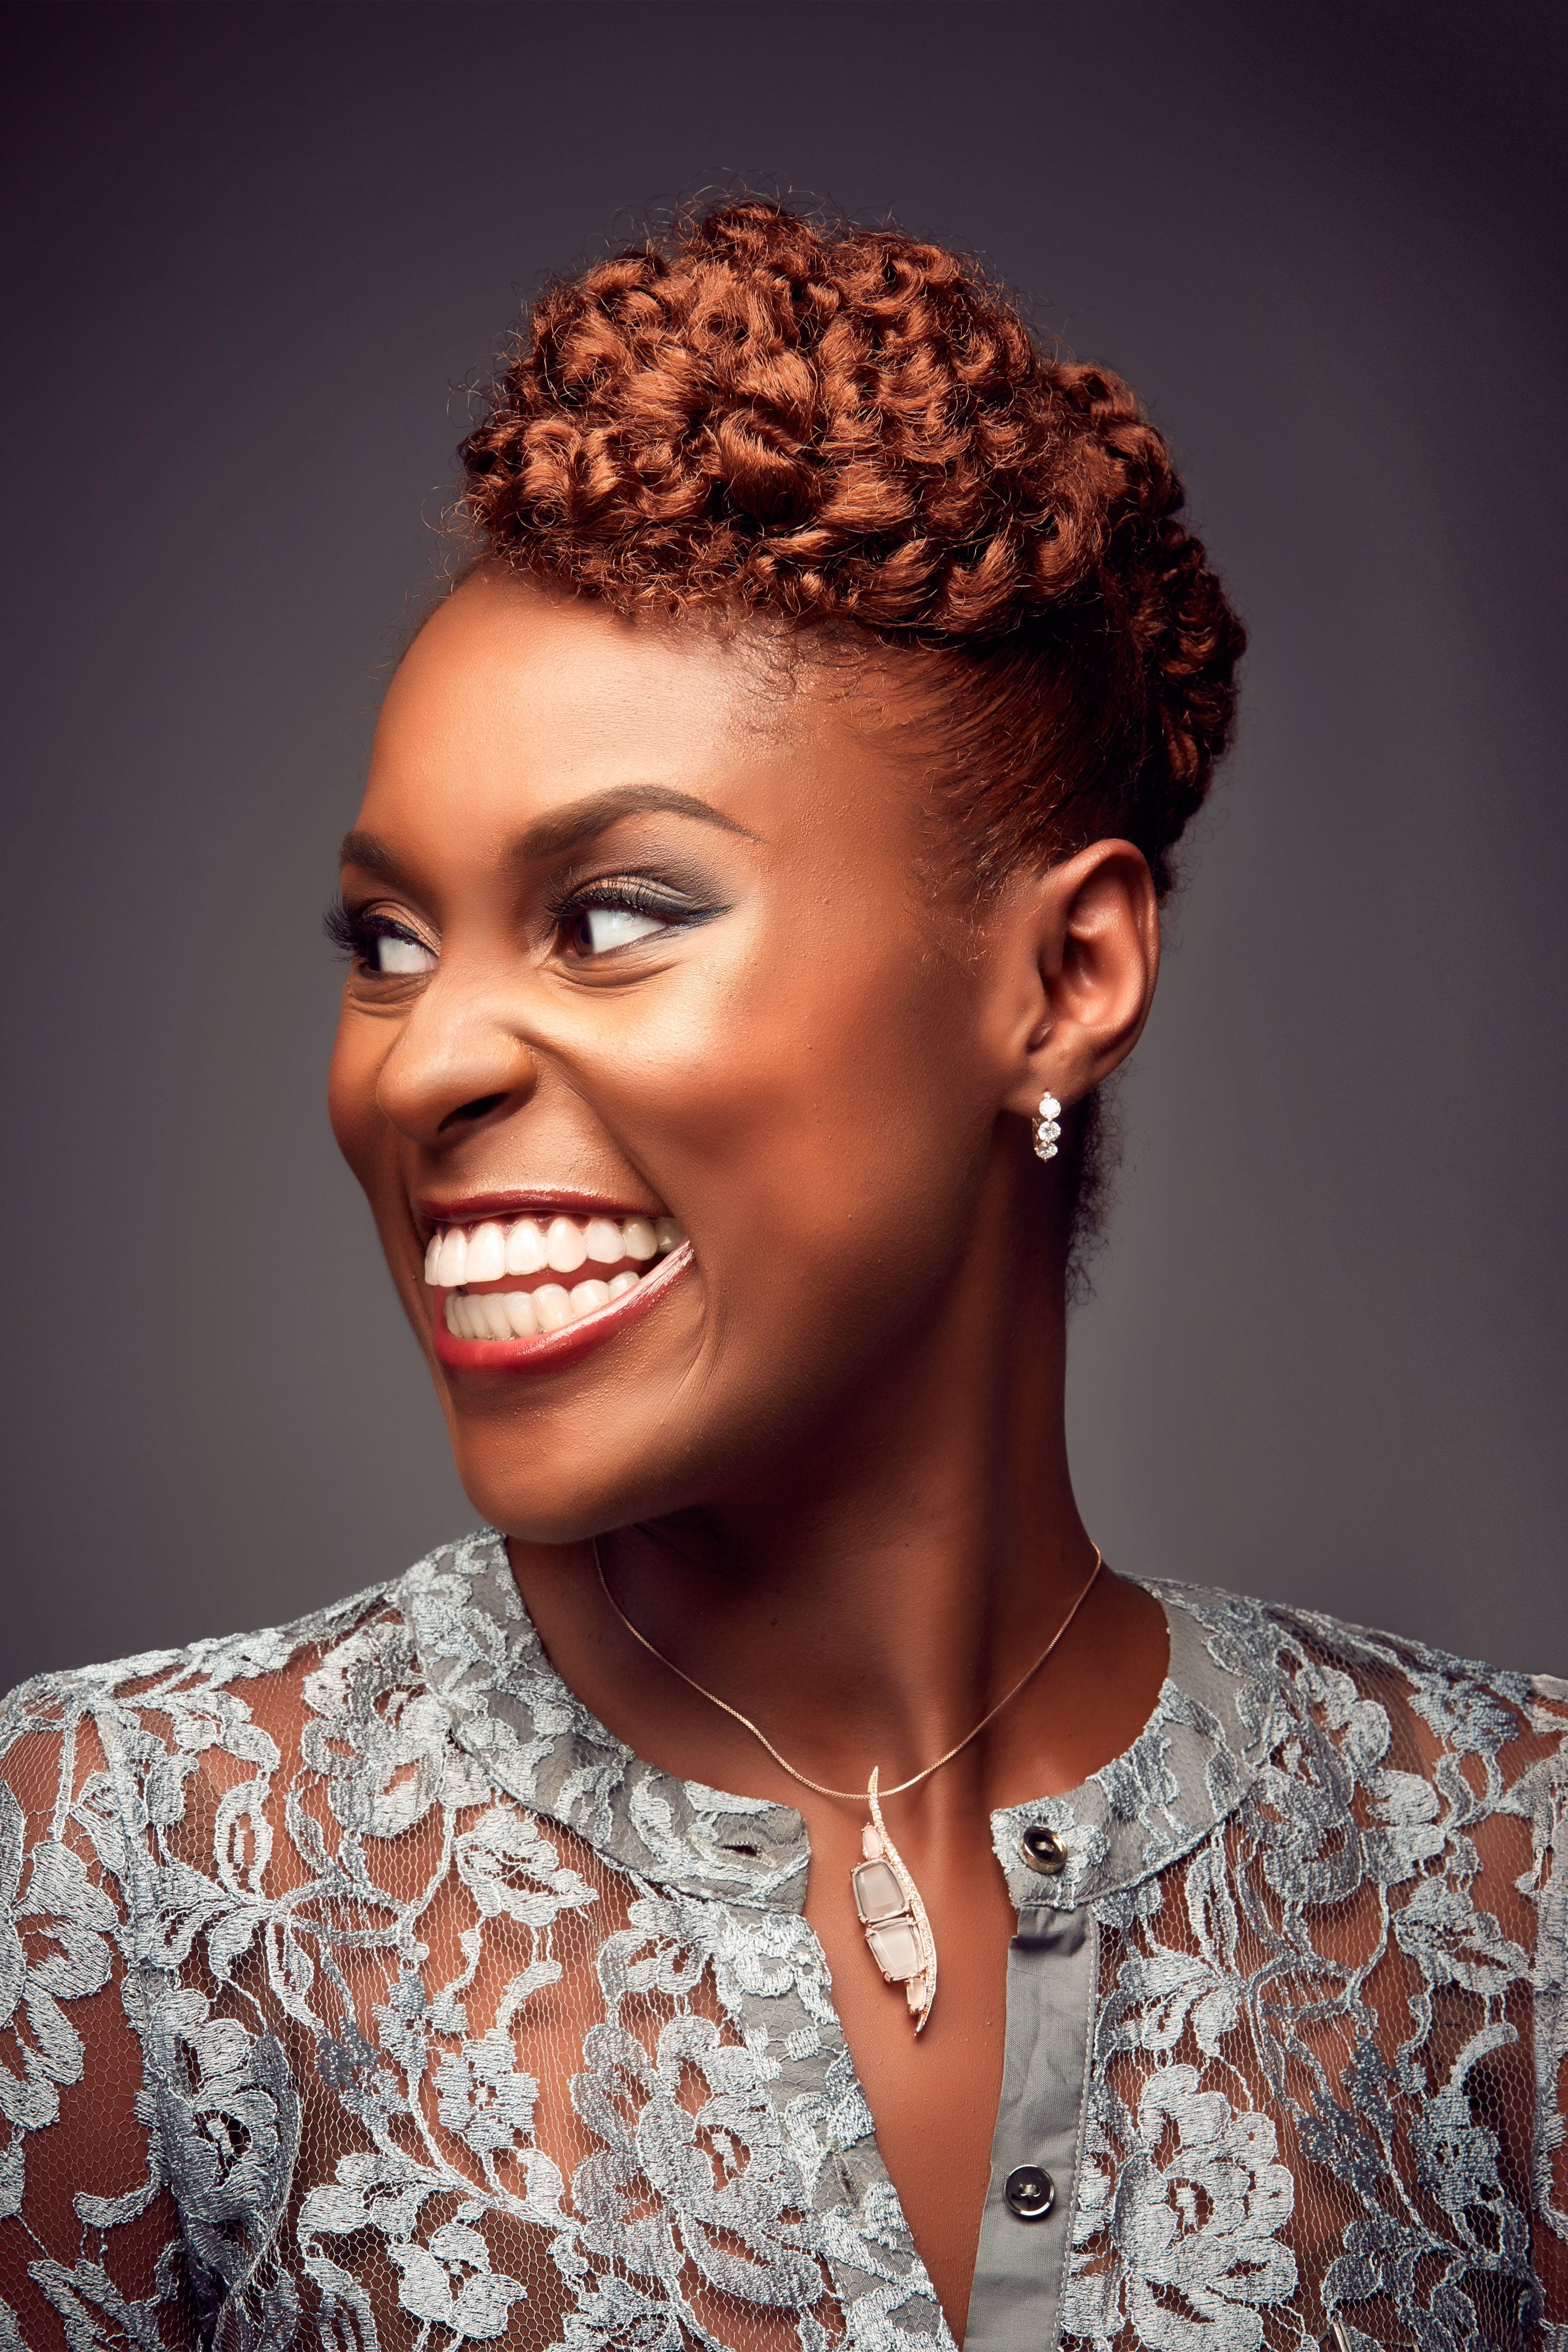 Issa Rae Officially Feels Famous